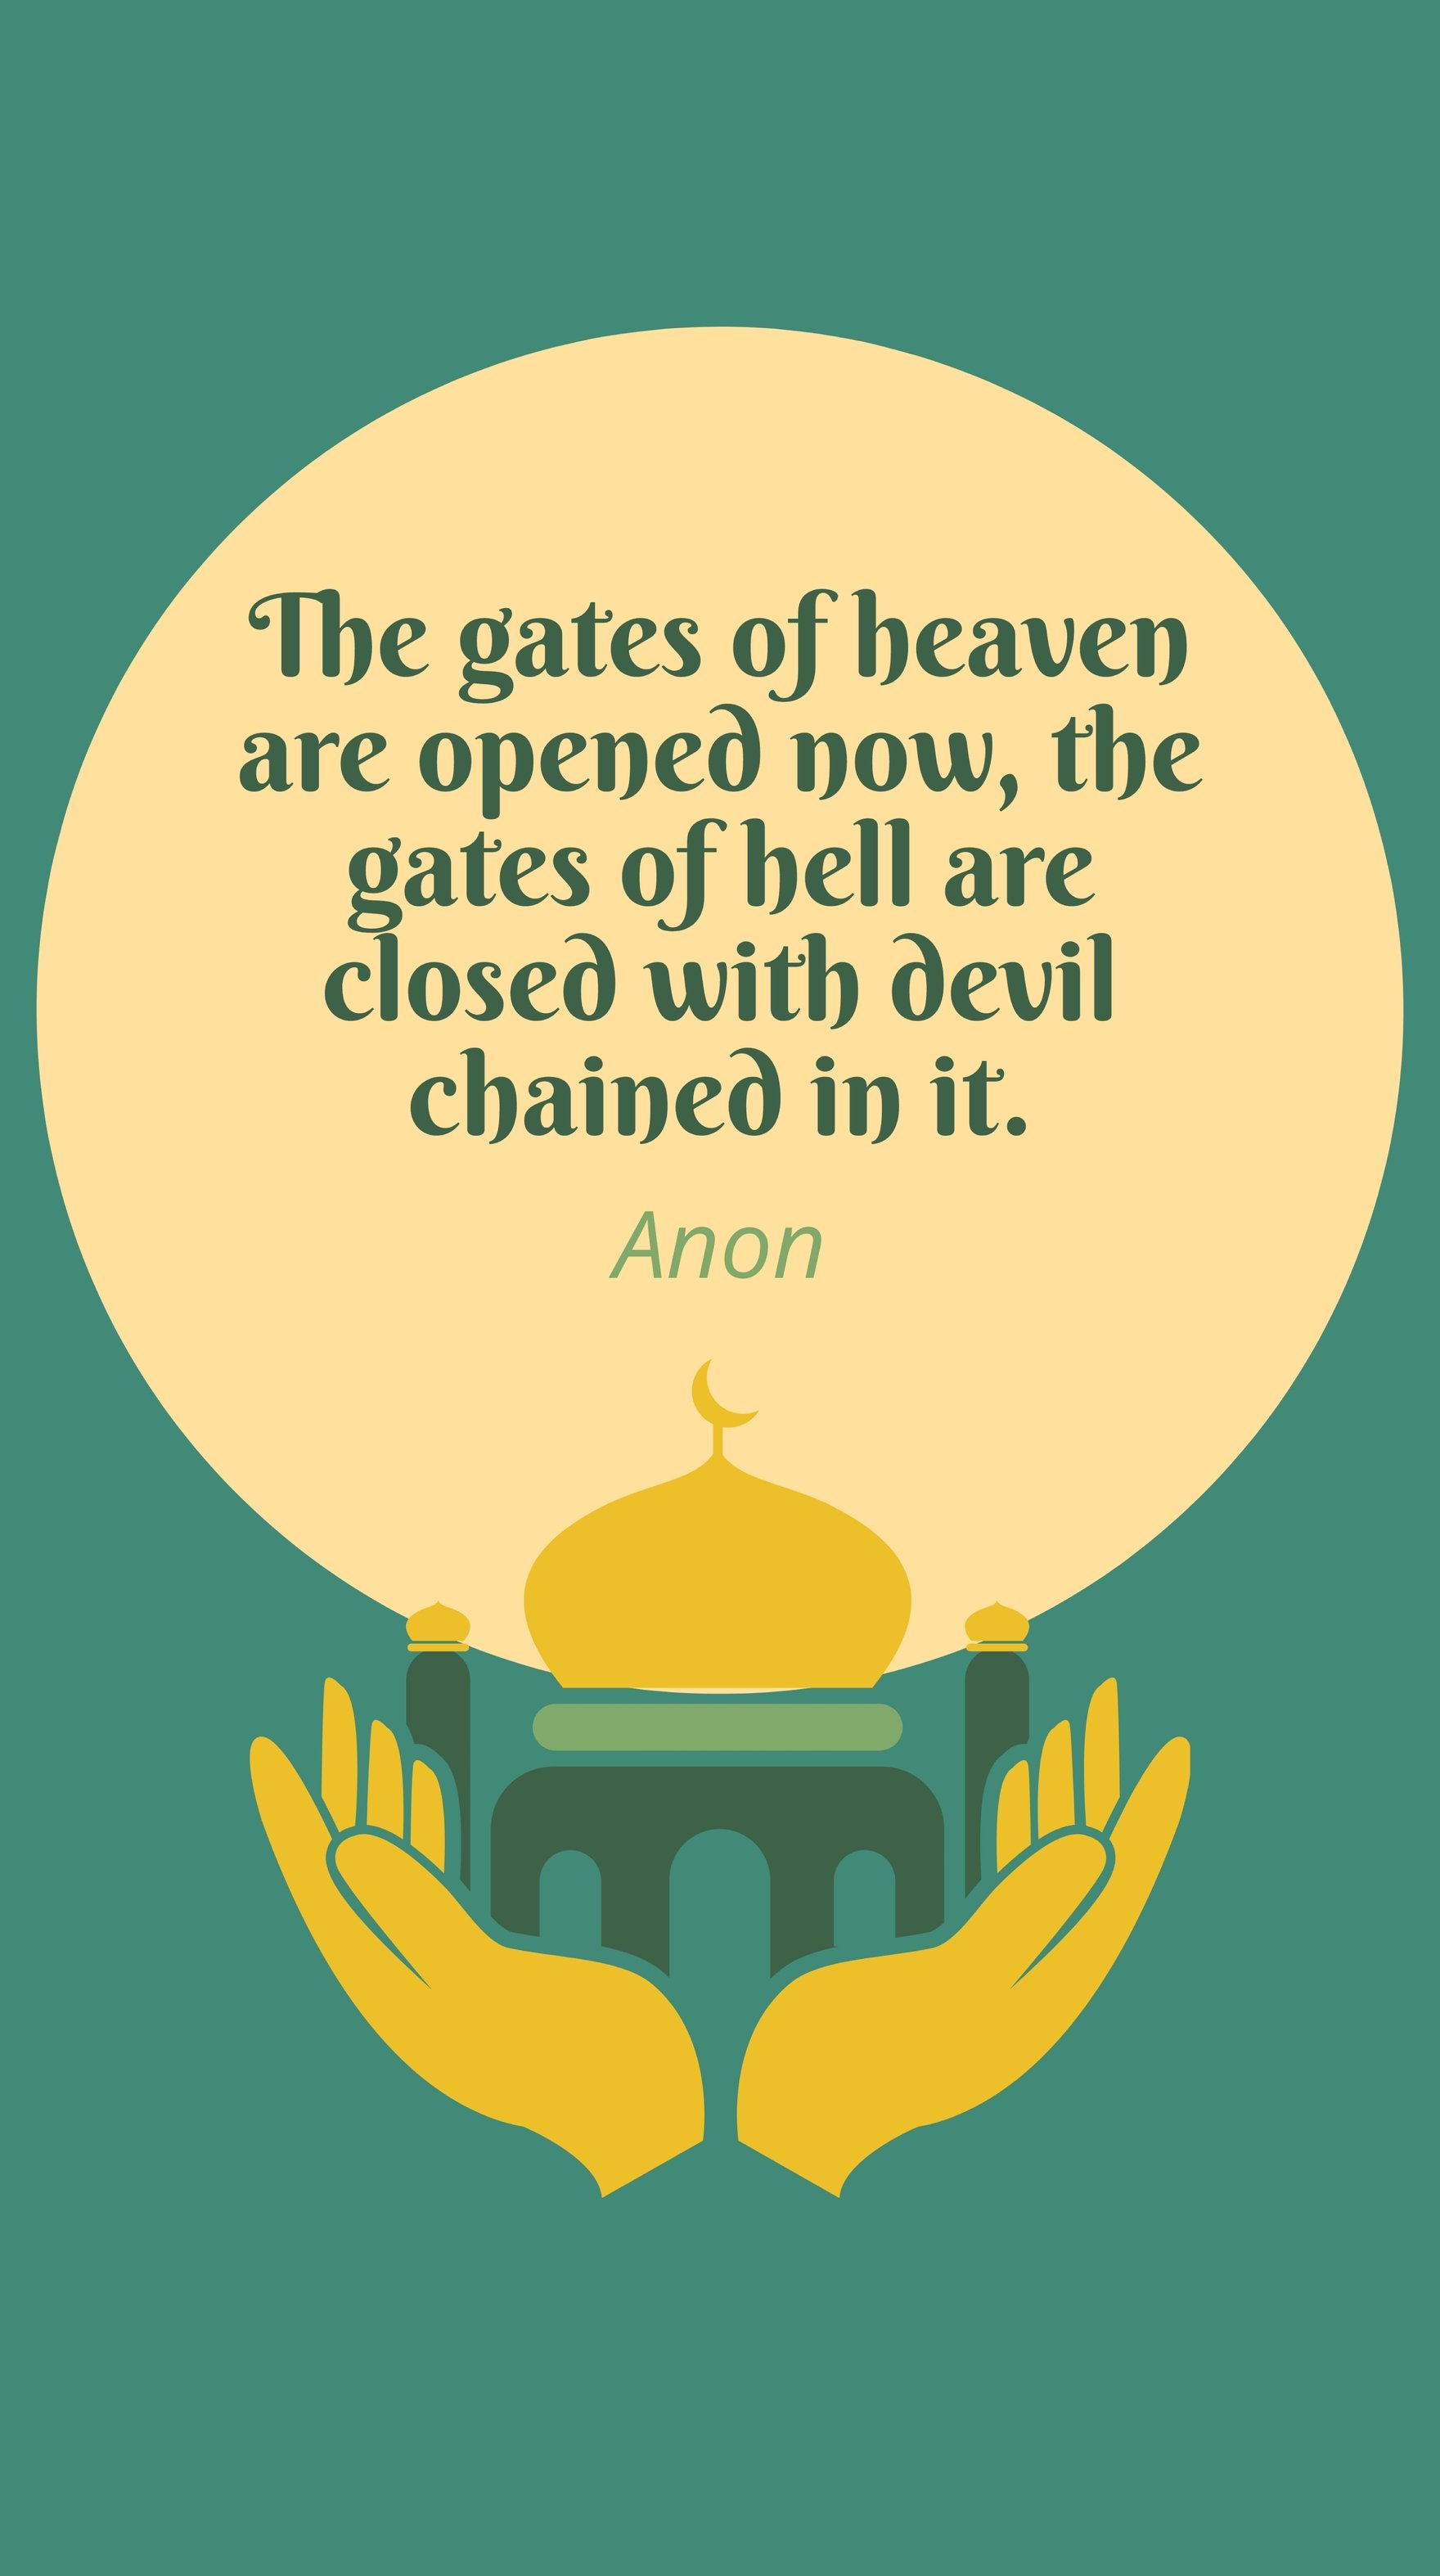 Anon - The gates of heaven are opened now, the gates of hell are closed with devil chained in it.